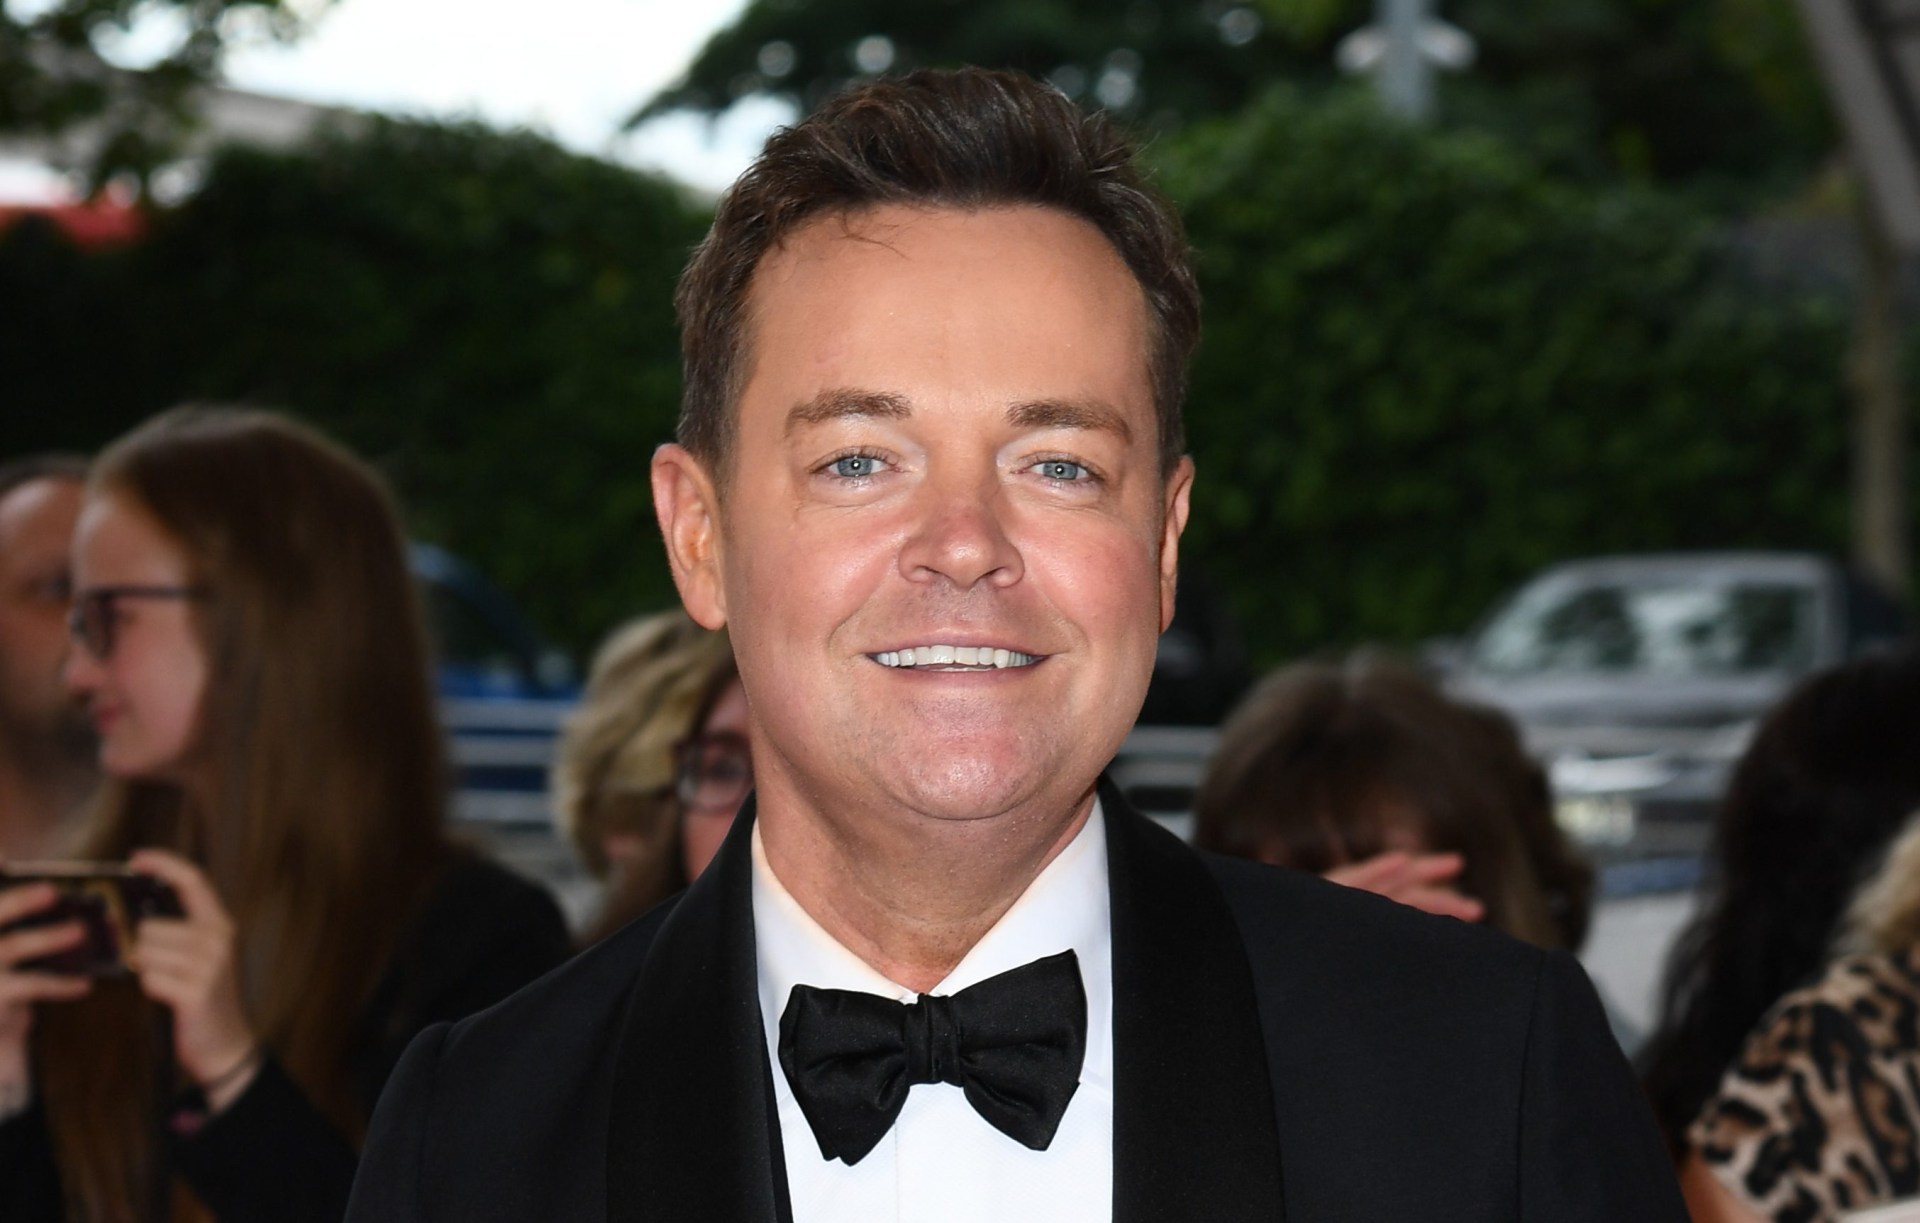 Stephen Mulhern had to step back last year on ‘doctor’s orders’ (Picture: Gareth Cattermole/Getty Images)